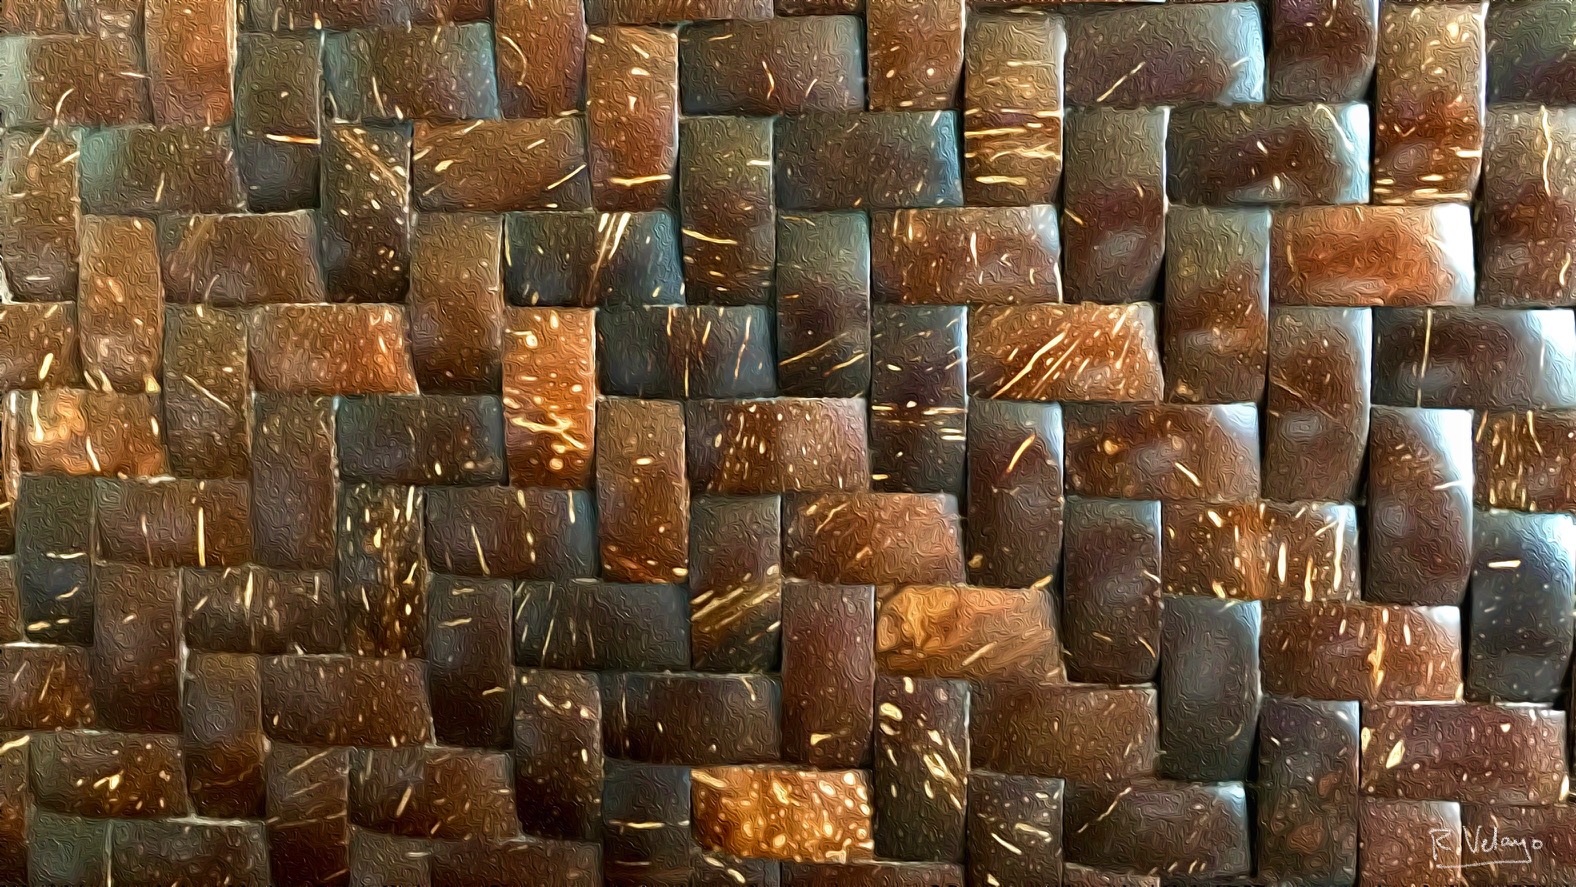 "COCONUT SHELL IN WOVEN PATTERN" [Created: 8/27/2021]